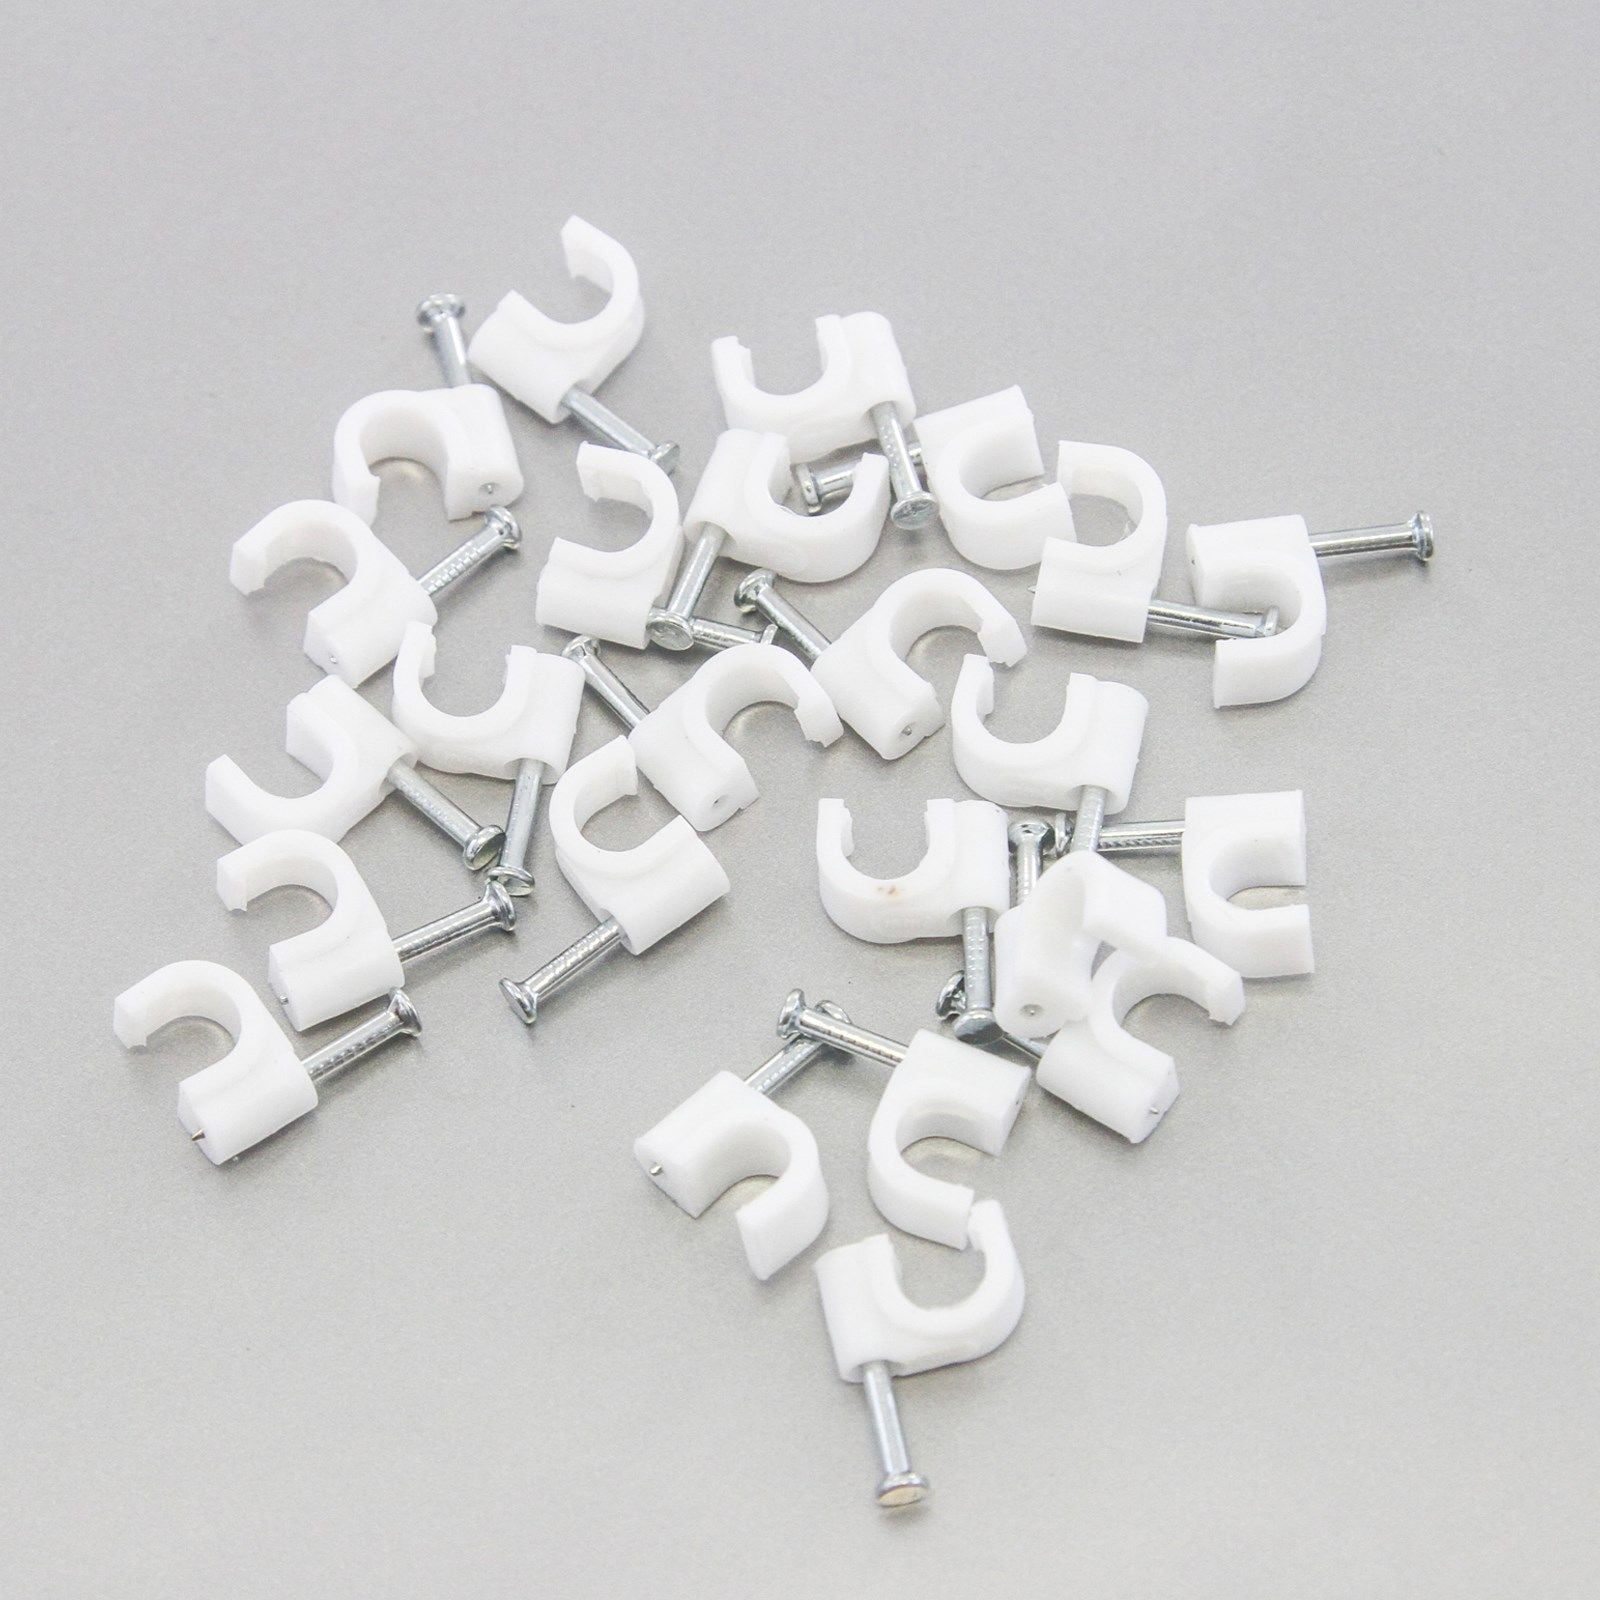 100 Round 5/16" 8 mm Cable Wire Clips Cable Cord Tie Holder Coaxial Clamps Tacks